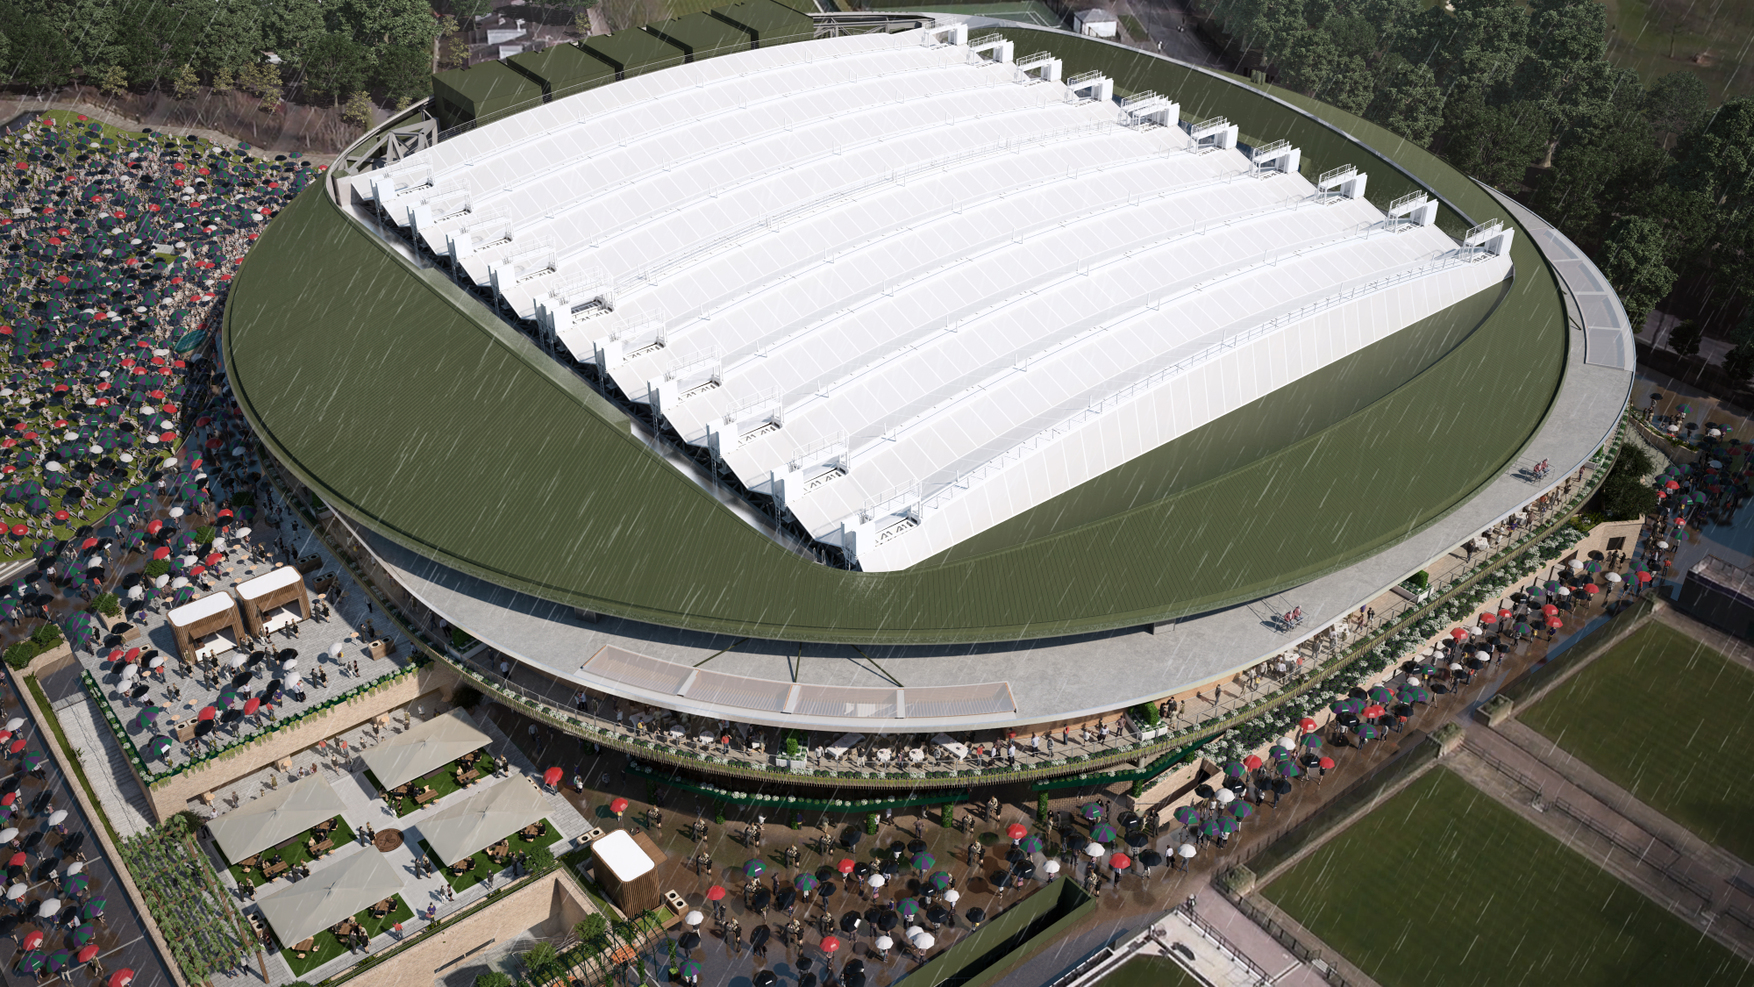 Roof over Wimbledon No.1 Court will be ready by 2019 